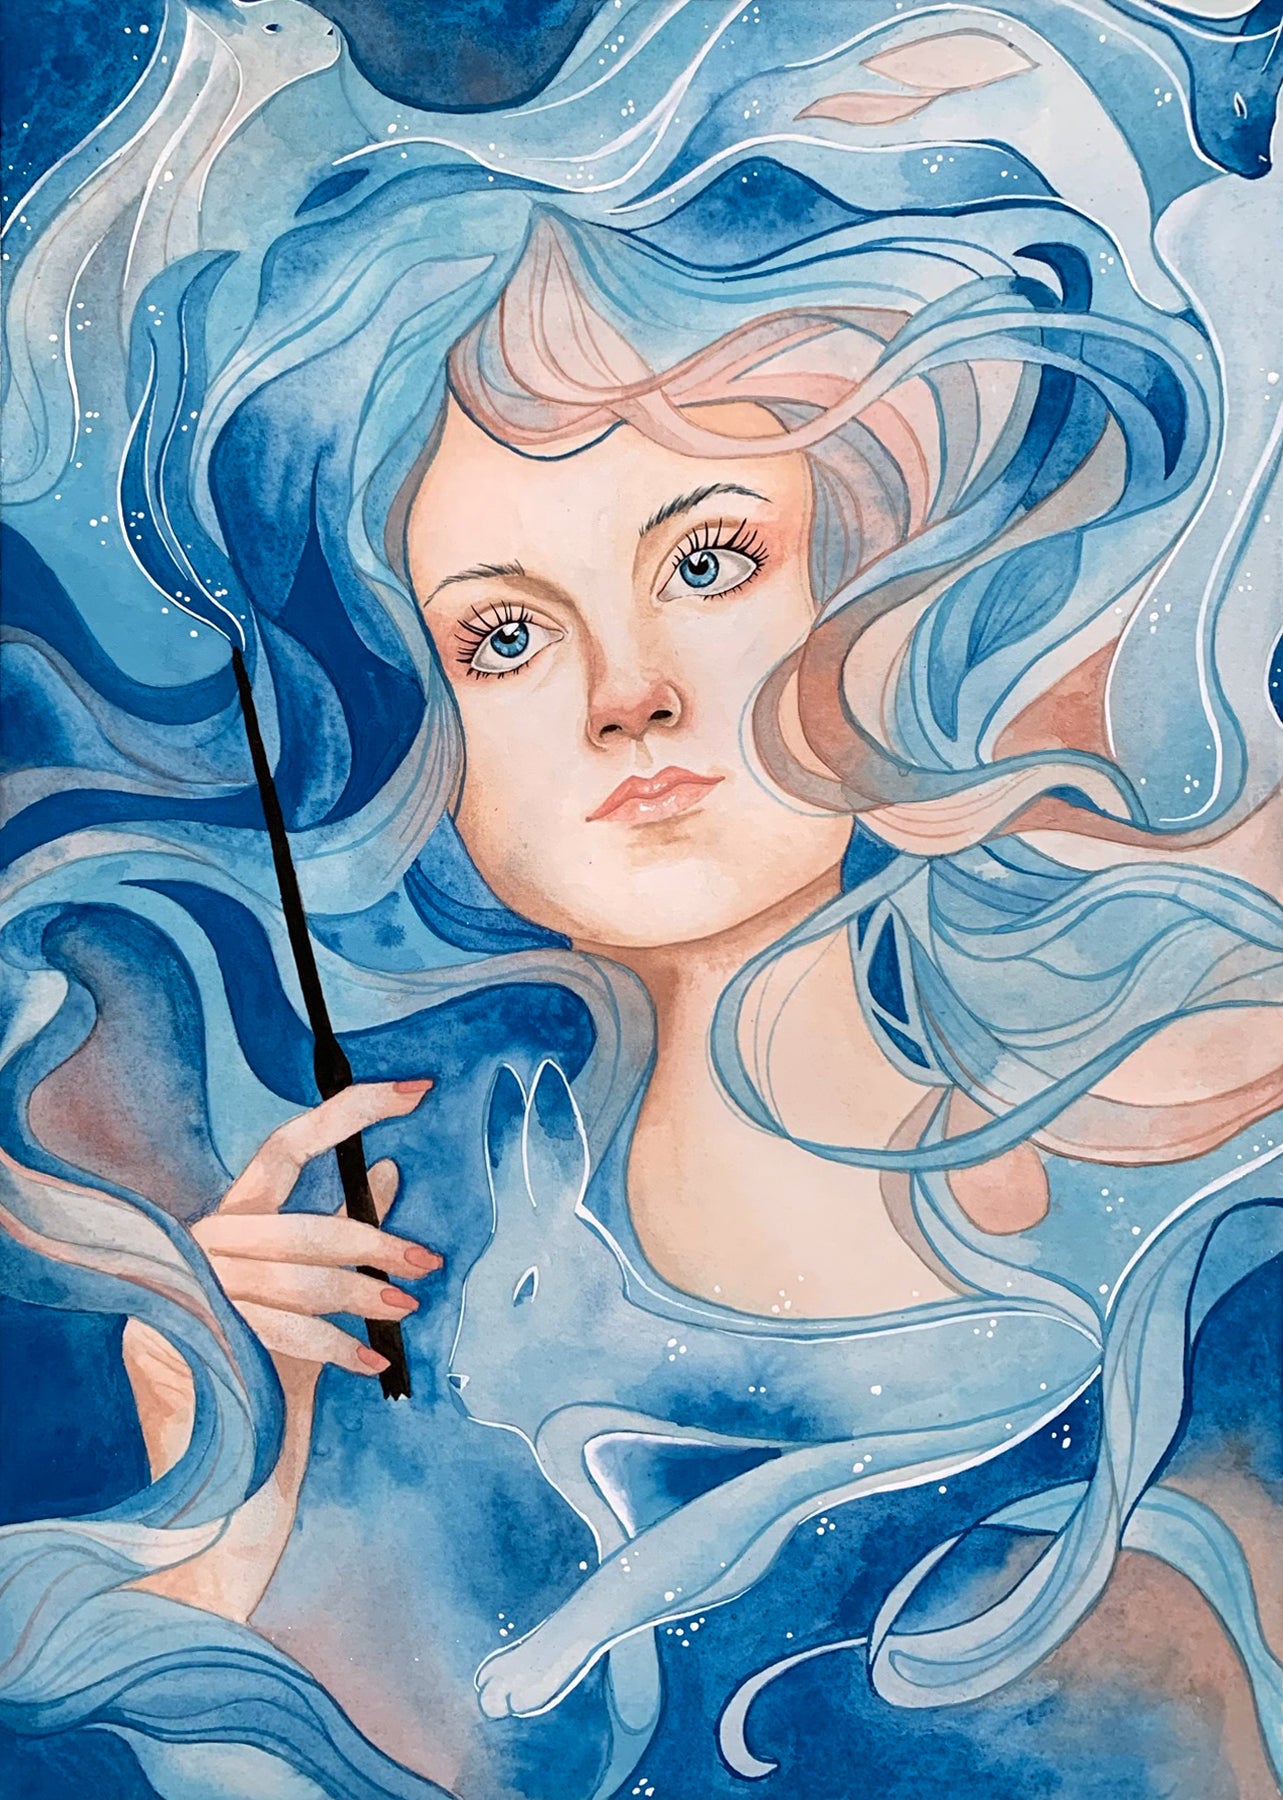 Watercolor painting done in blues and peach of the character Luna Lovegood from the Harry Potter movie series. She's holding a wand and casting her rabbit Patronus charm.